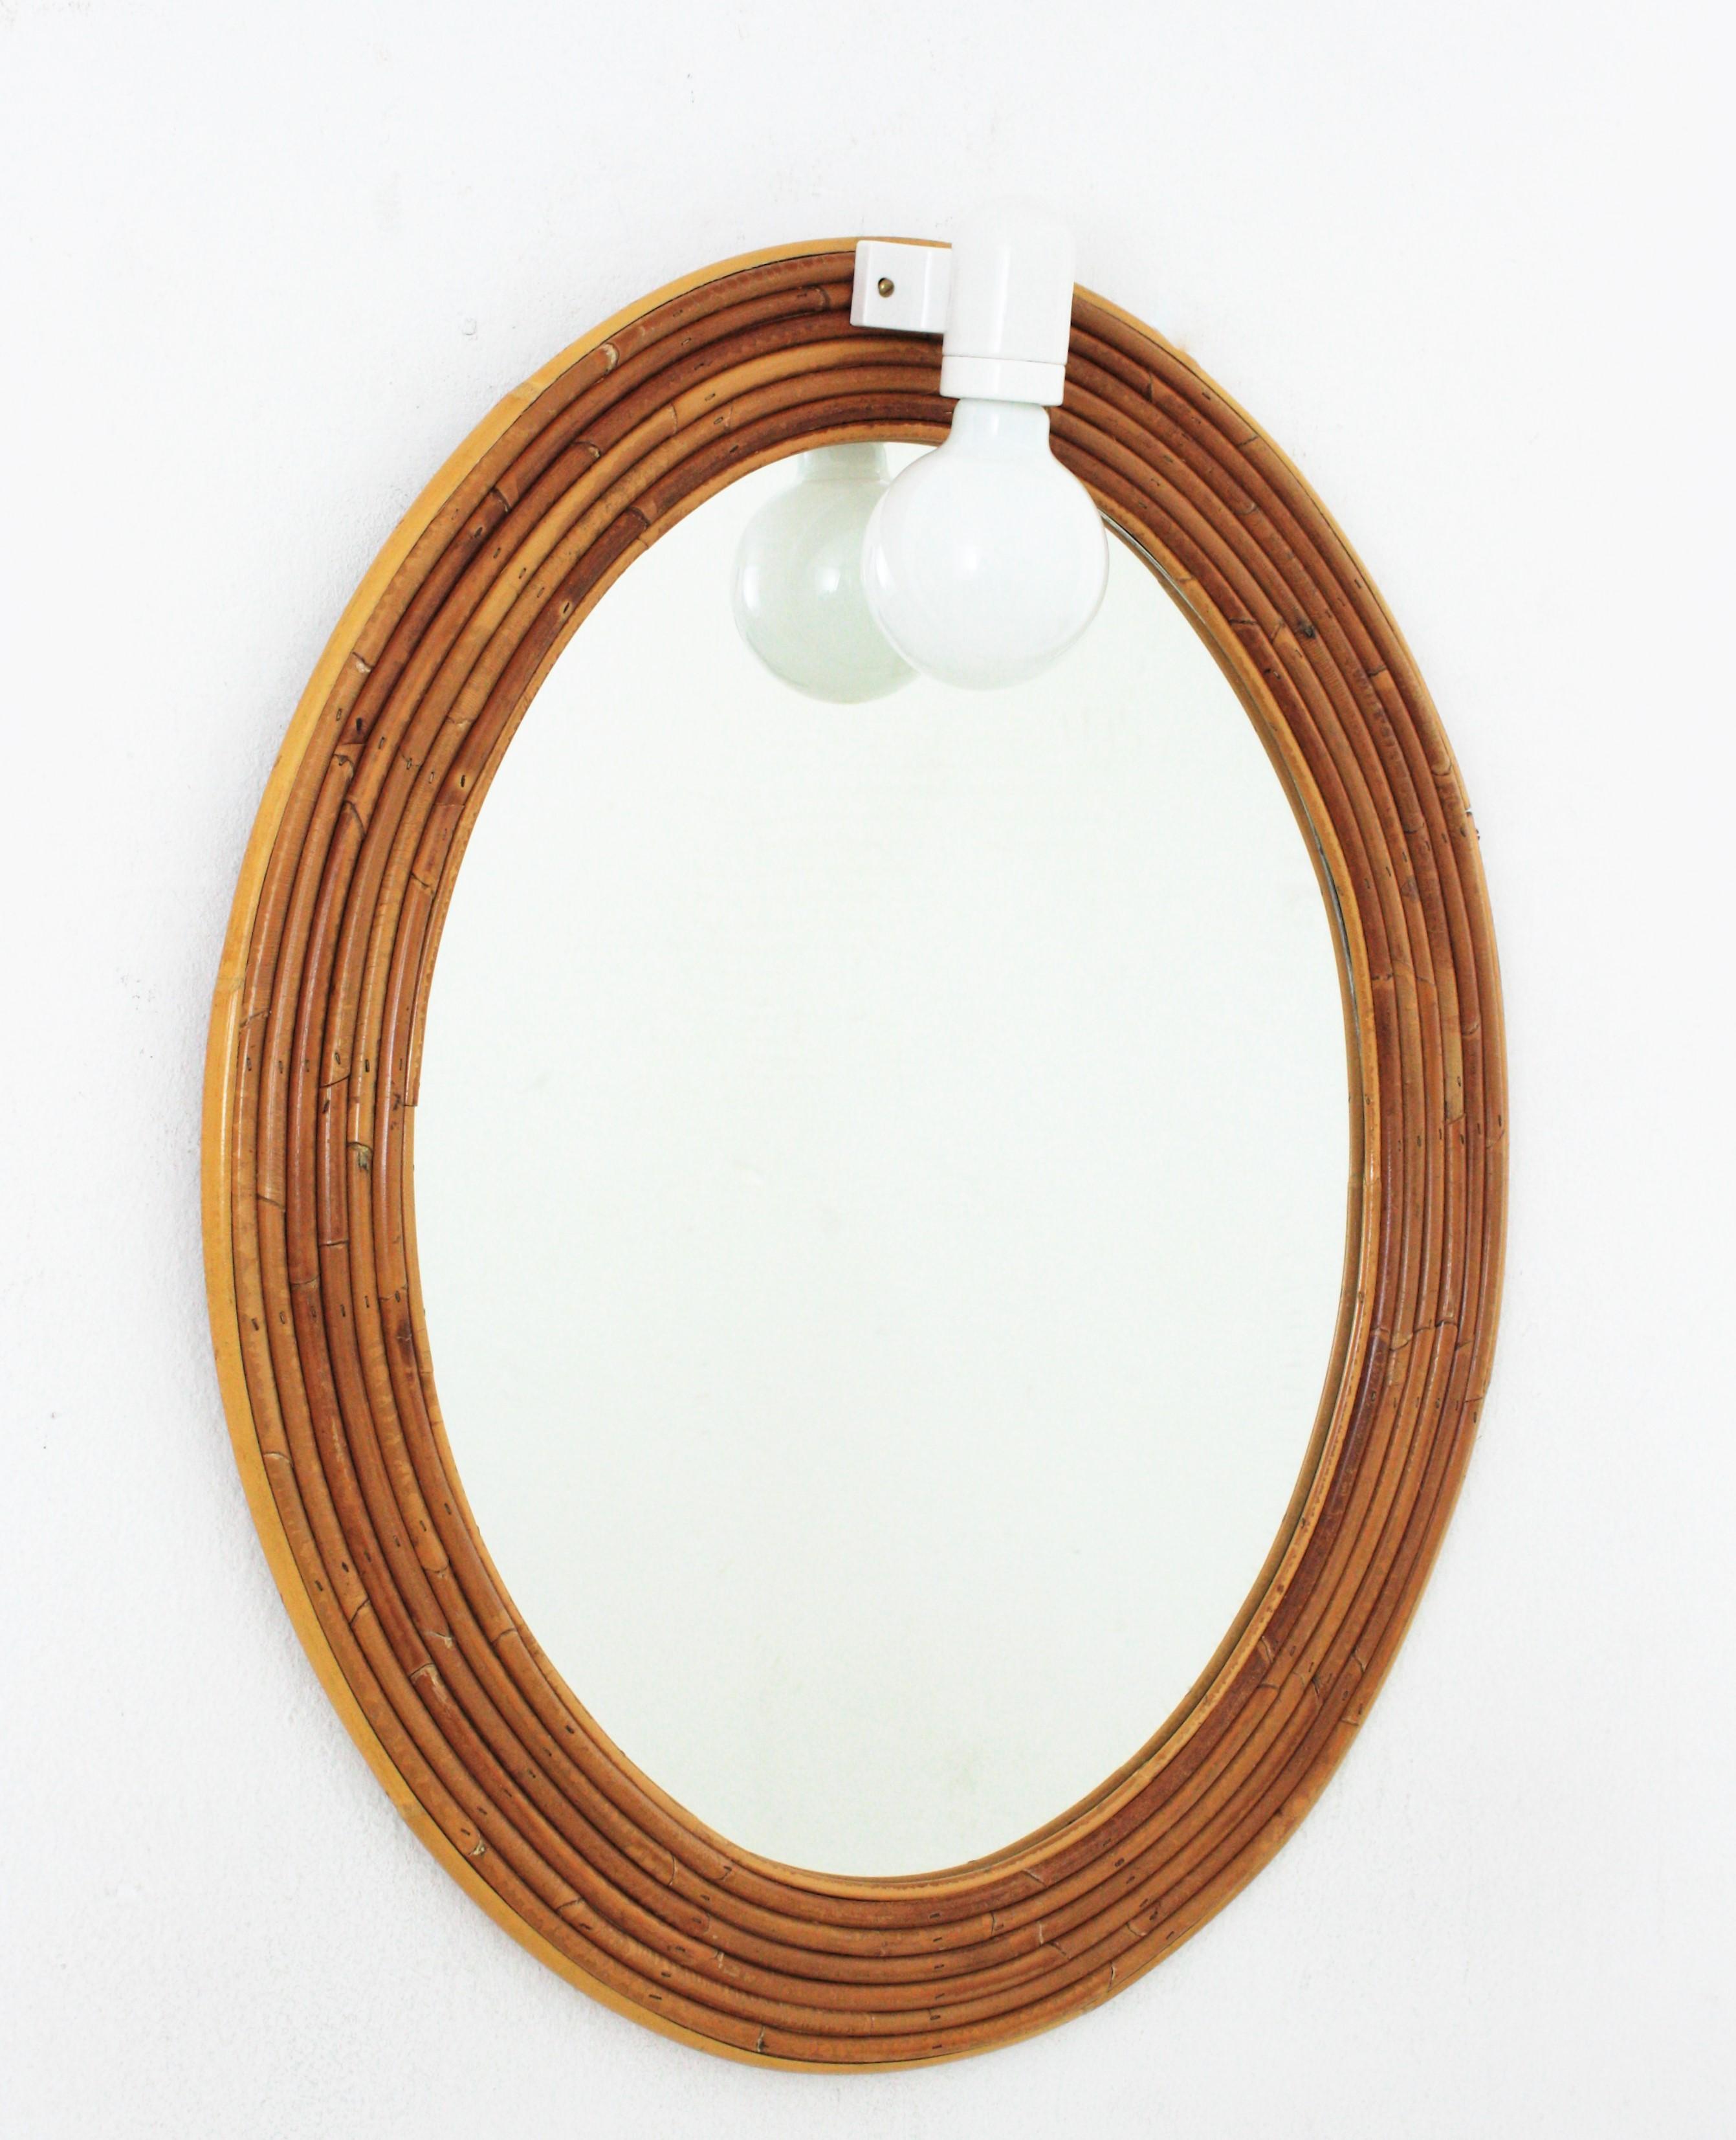 Eye-caching Organic Modern oval handcrafted in rattan / pencil reed. Attributed to Vivai del Sud. Italy, 1960s.
This mirror features a finely executed oval frame made of layers of rattan canes. It has a light on the top.
As the original light